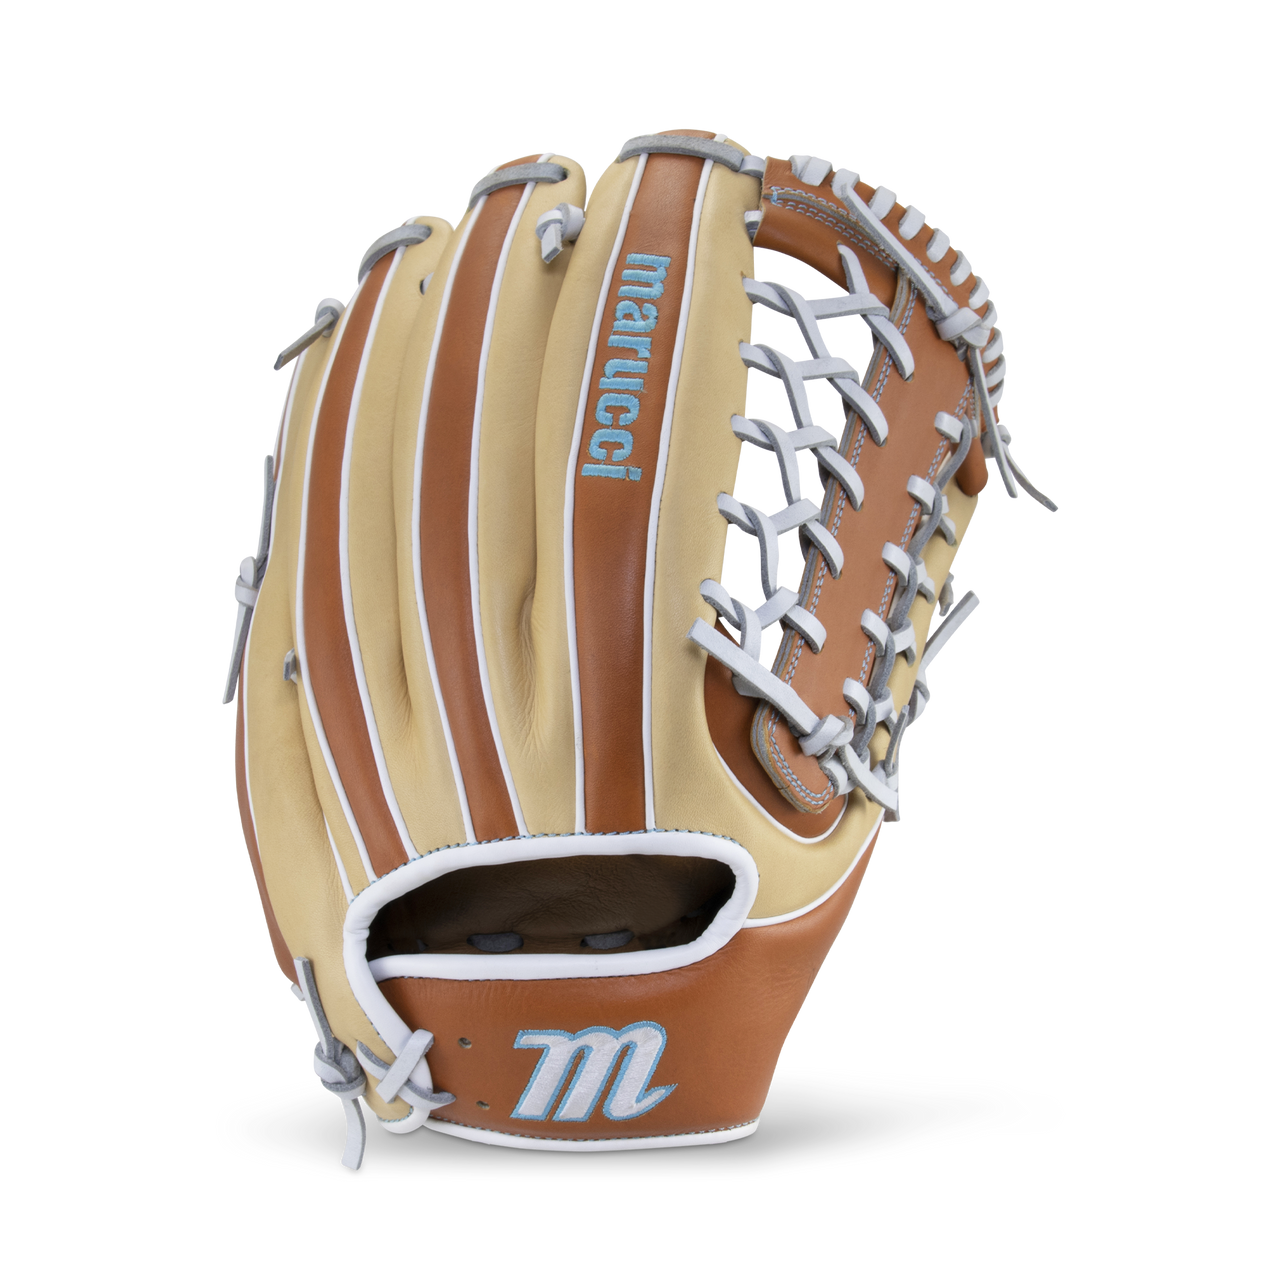 marucci-acadia-fastpitch-softball-glove-99r4-13-inch-t-web-right-hand-throw MFGACFP99R4-CMCB-RightHandThrow Marucci  <p><span style=font-size large;>The ACADIA FASTPITCH M TYPE 99R4FP 13 T-WEB is